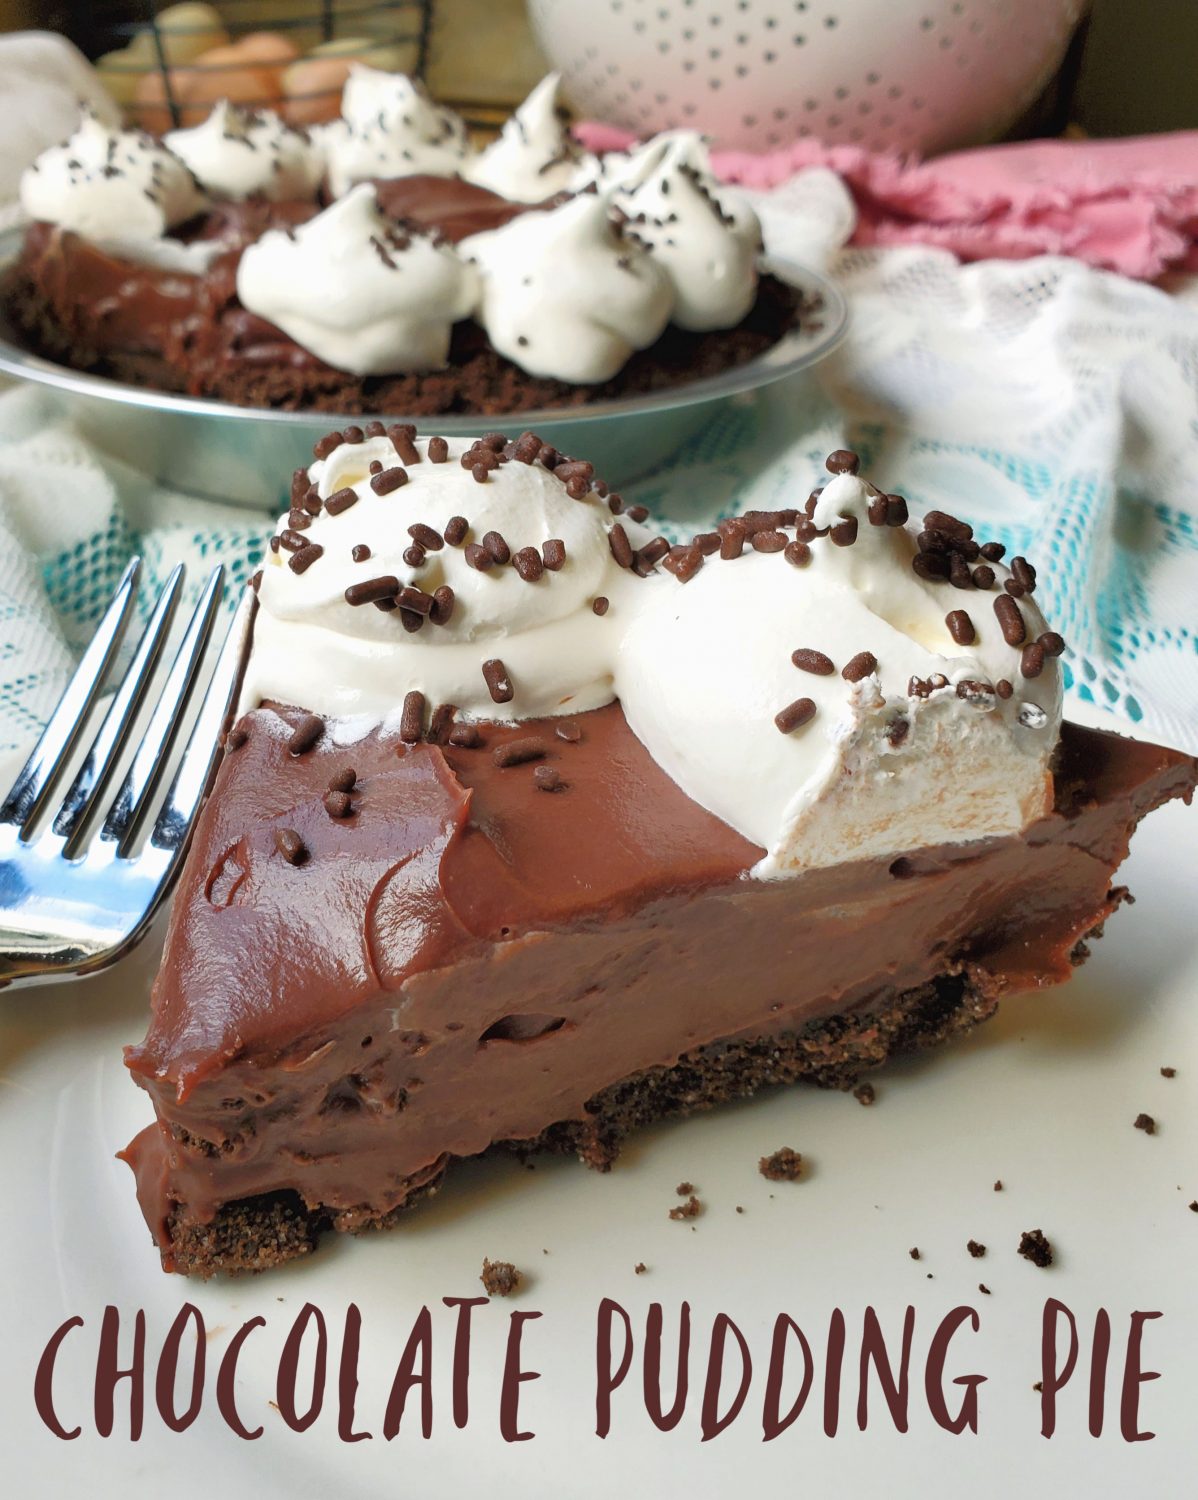 Chocolate Pudding Pie: Super creamy & delicious chocolate pudding pie filling topped with loads of whipped cream in your favorite chocolate or graham crust!